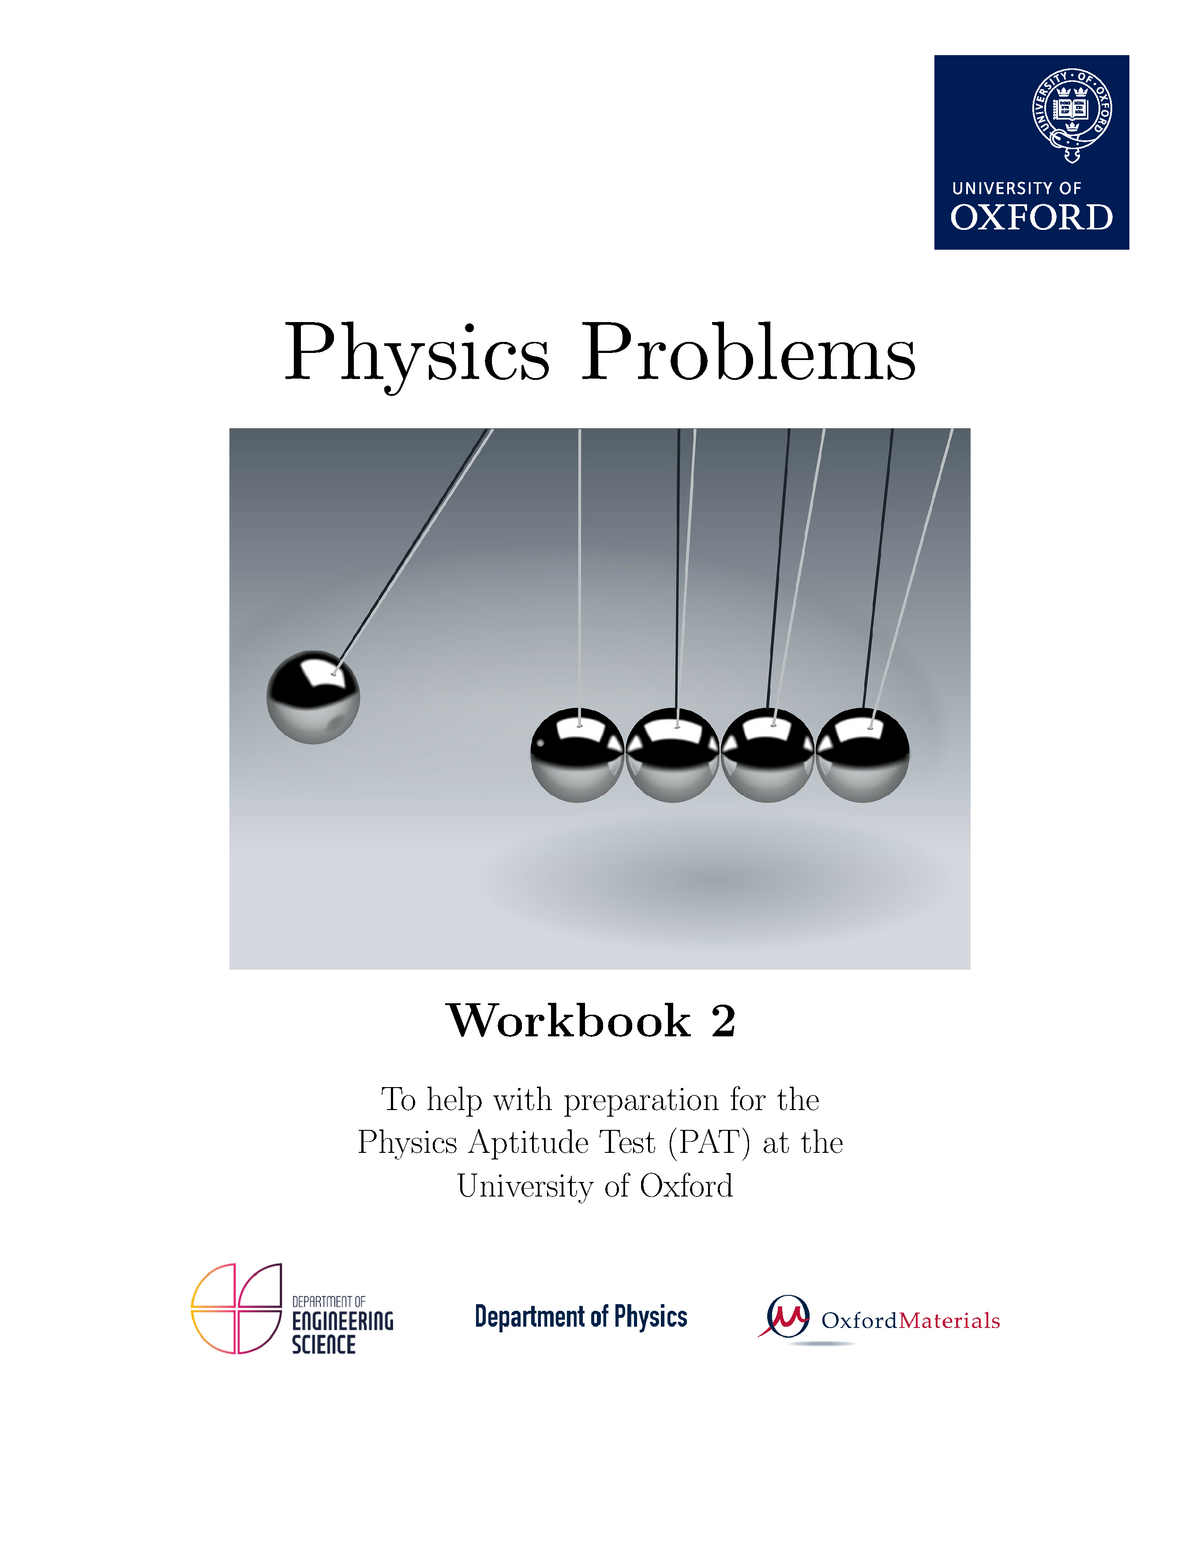 workbook-2-physics-problems-workbook-2-to-help-with-preparation-for-the-physics-aptitude-test